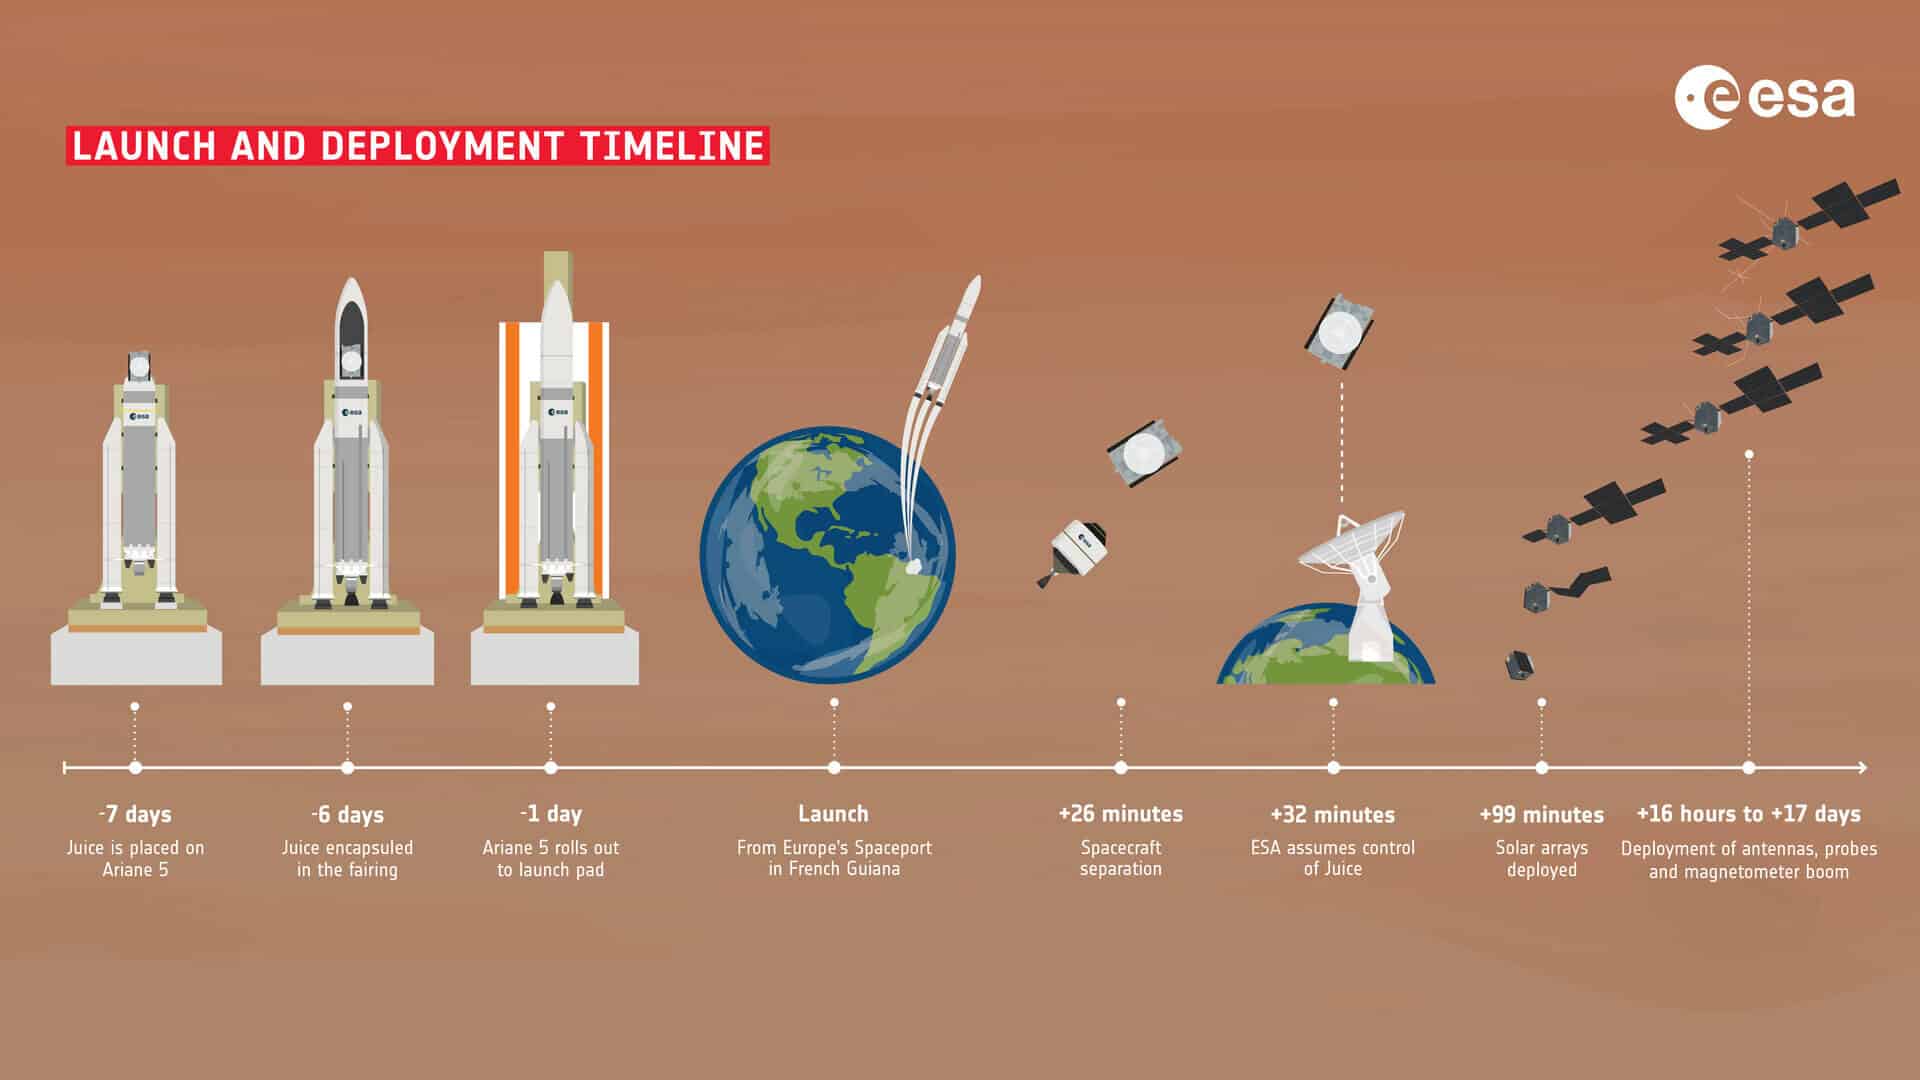 JUICE operation schedule. Infographic: European Space Agency